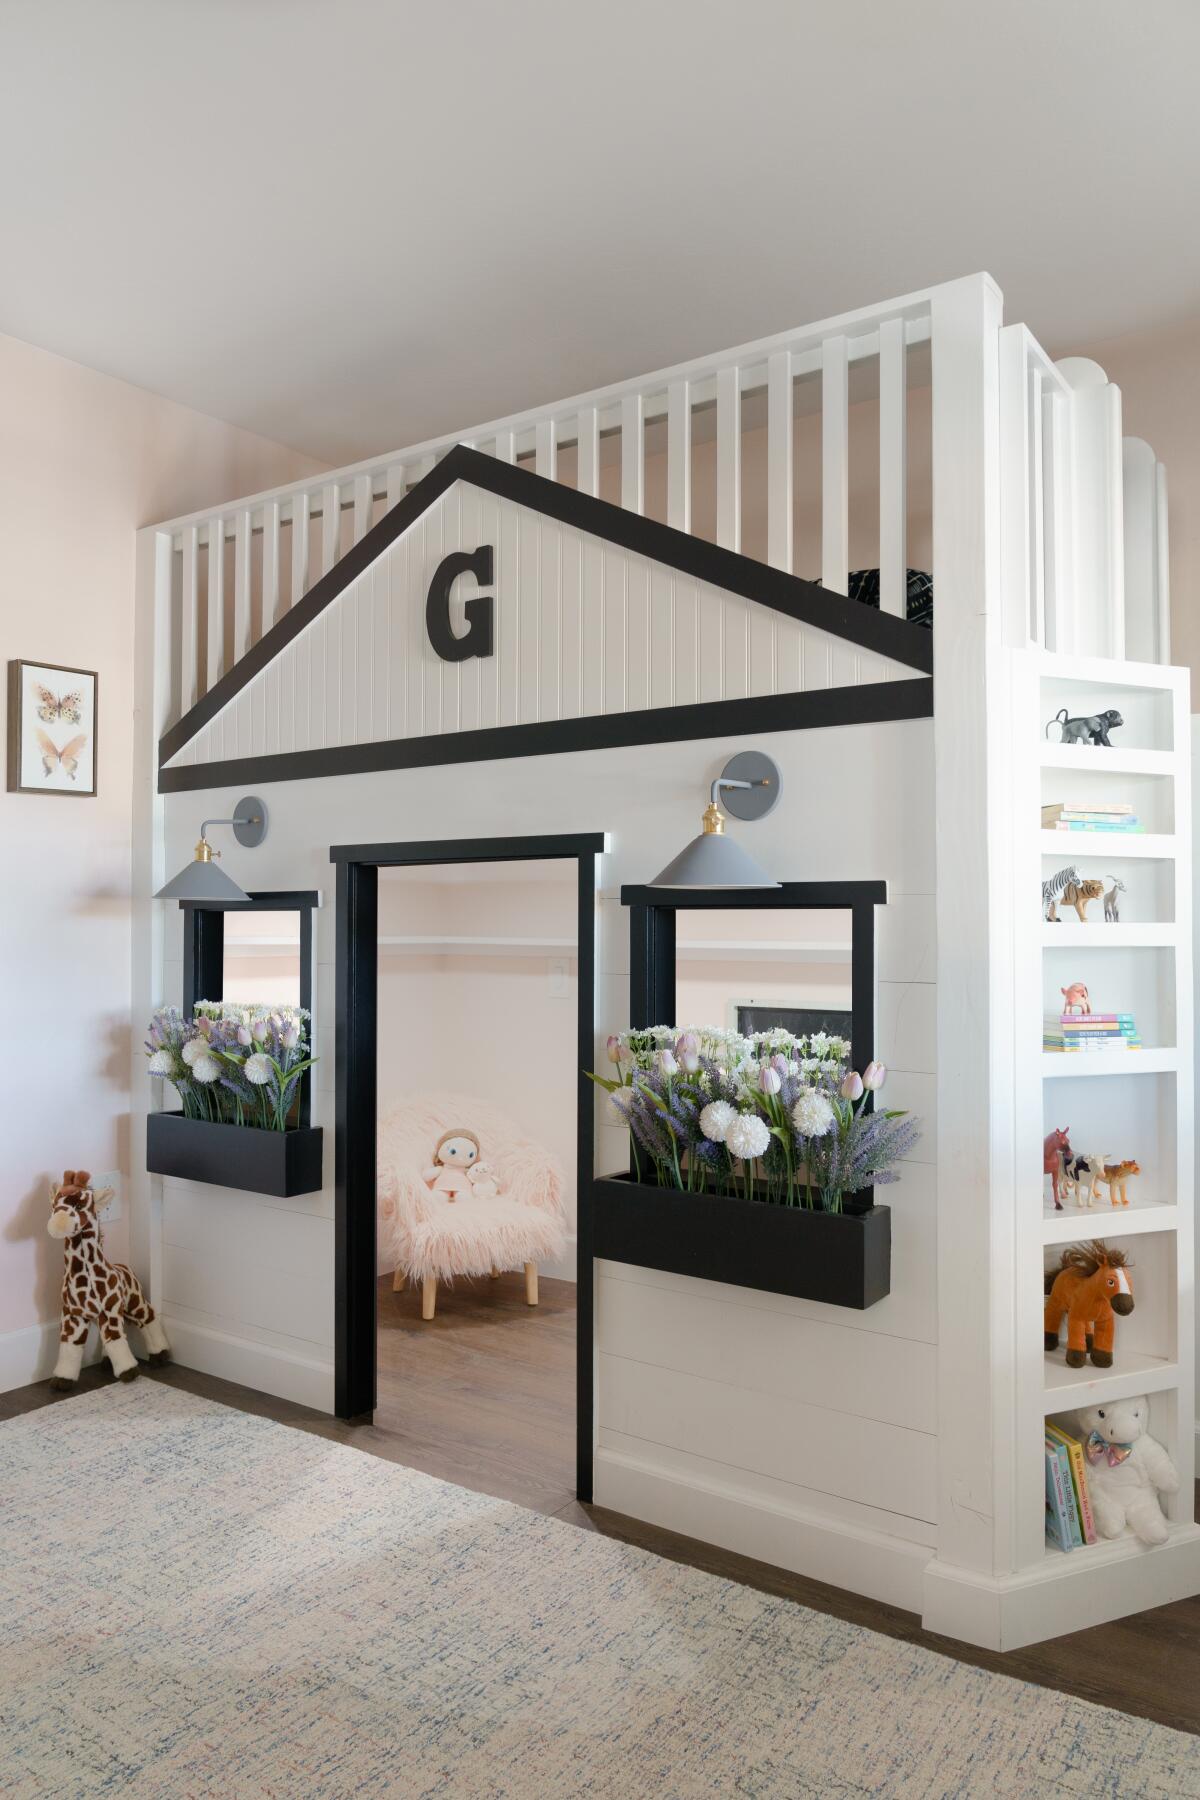 Built-ins provide smart storage for books and toys alongside the playhouse in the "farmhouse luxe" girls room.